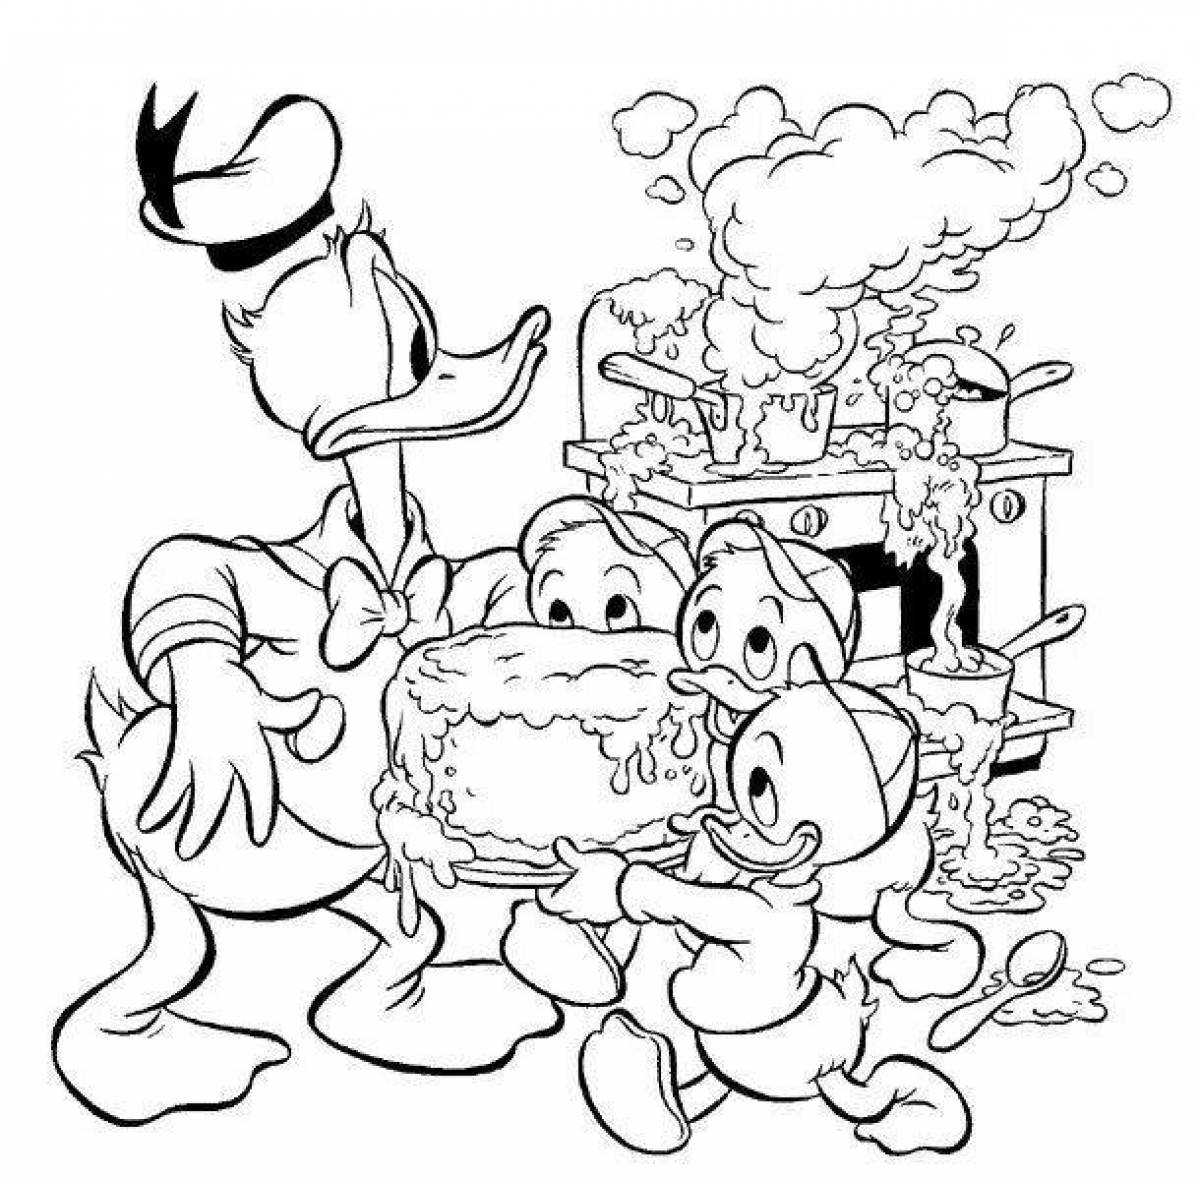 Clapping duck coloring page